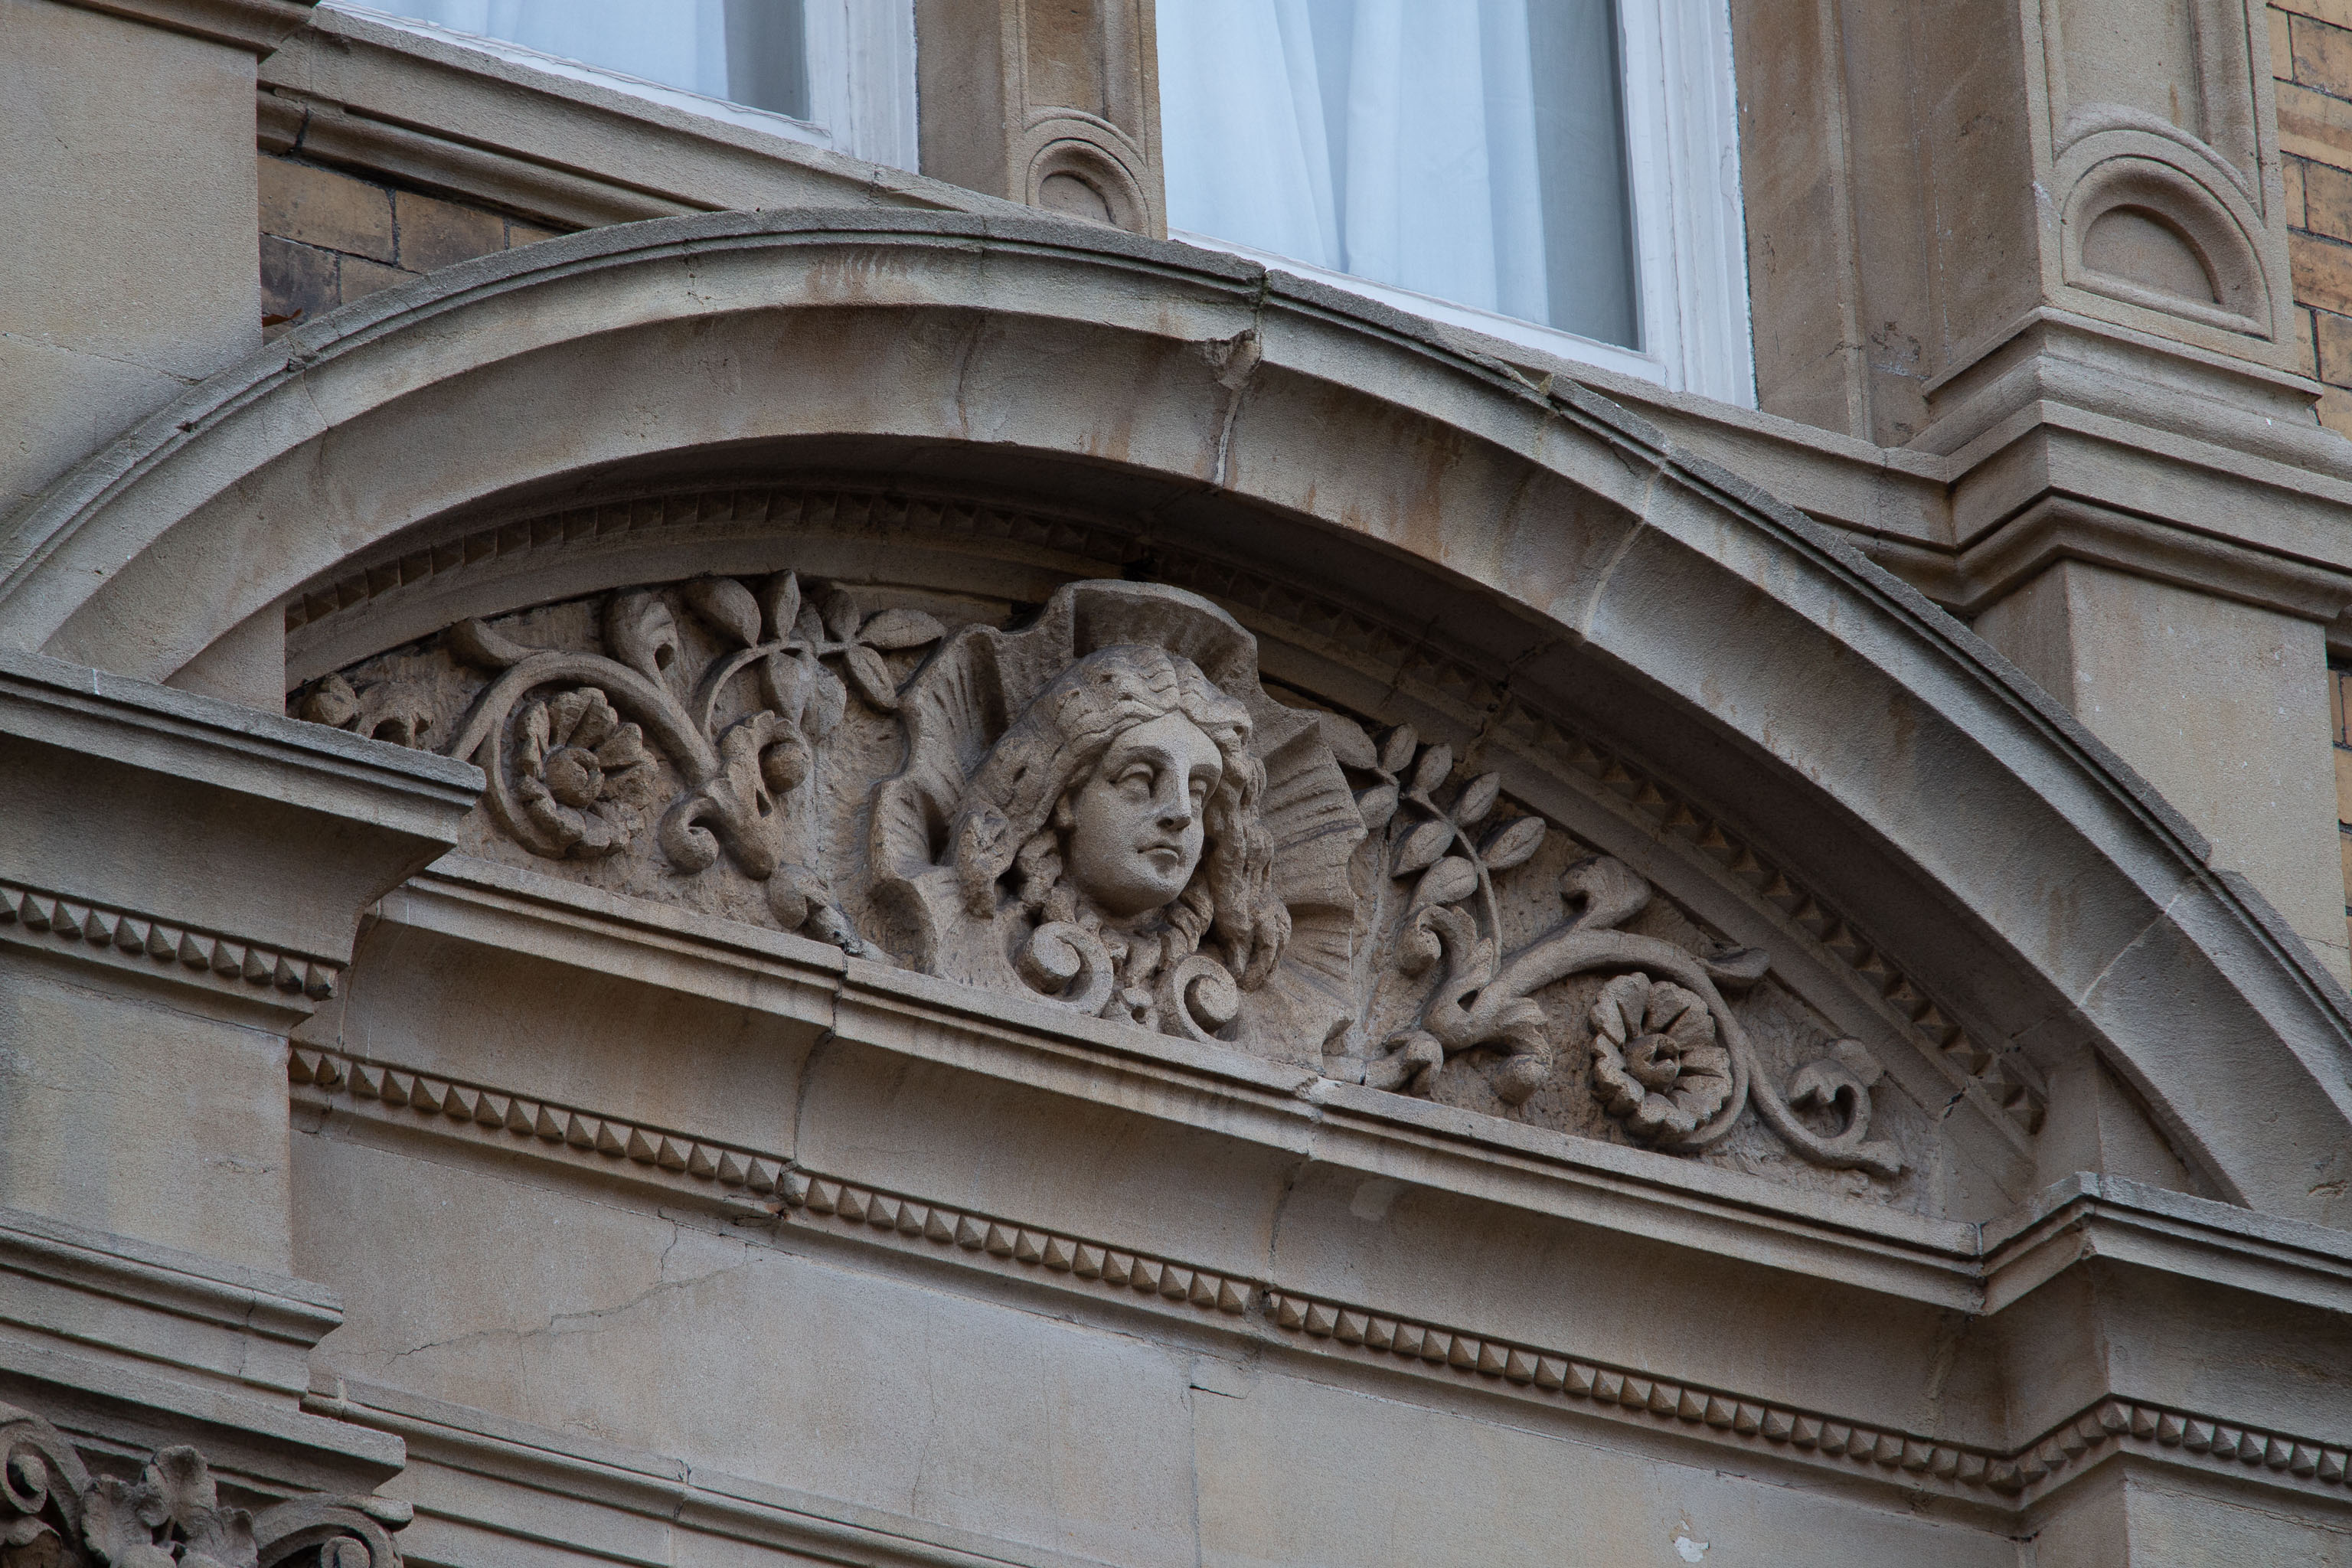 Face
From Regent Street, not far from the corner with Hensman's Hill (and on that side of the road)
